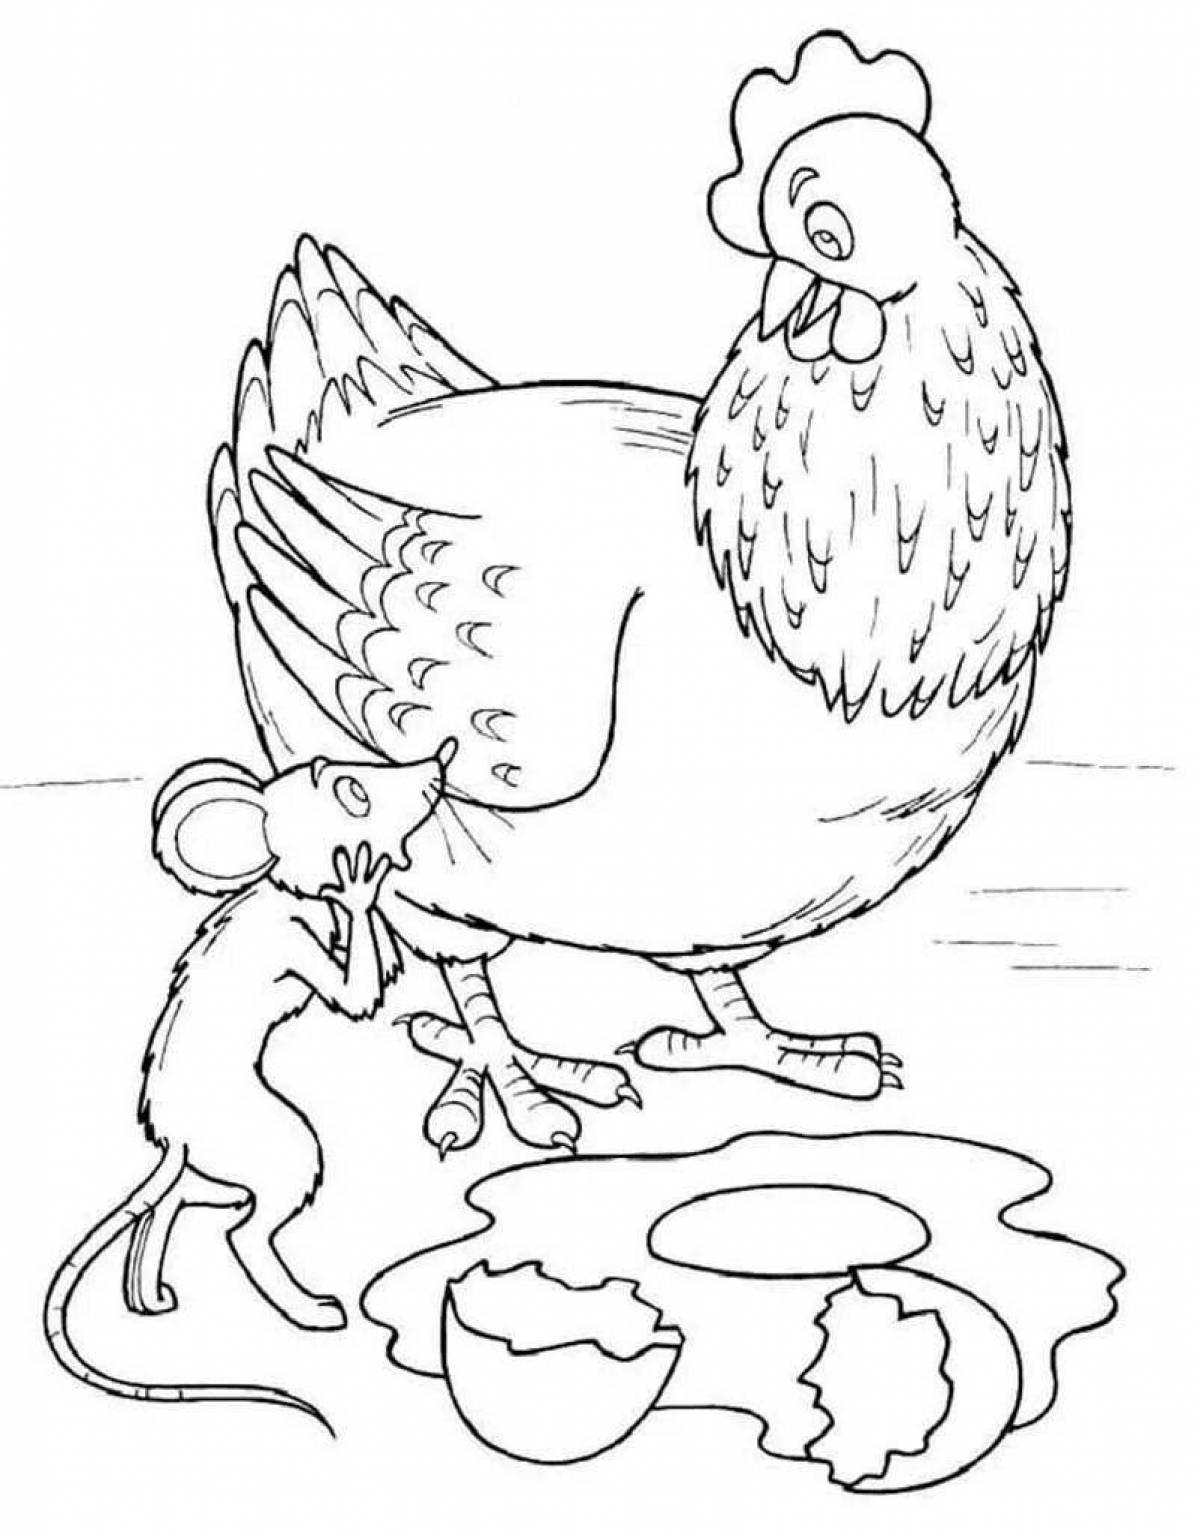 Ryaba chick coloring book for kids